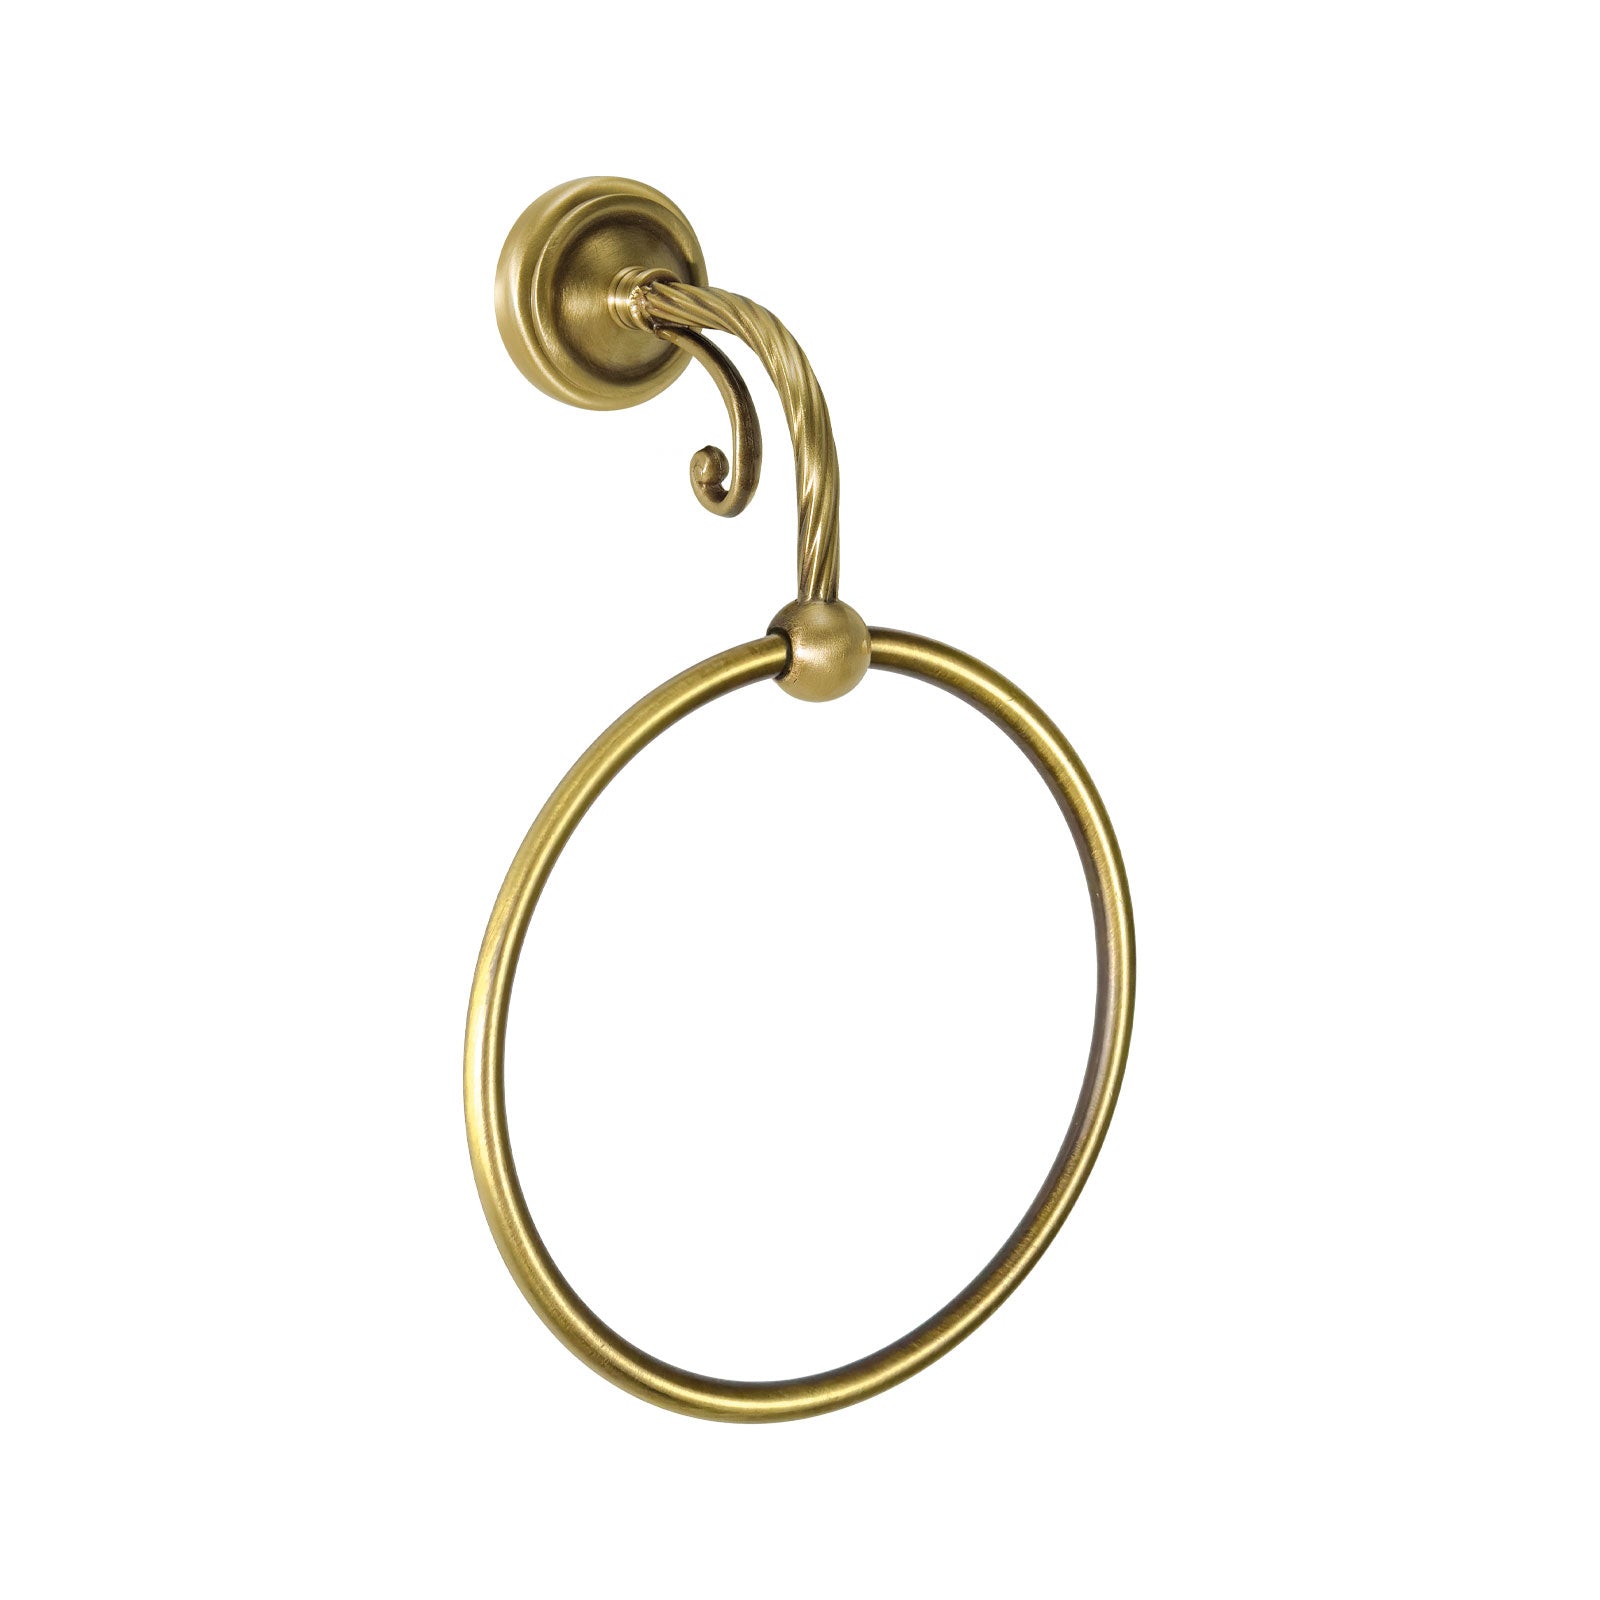 Vintage Brass Towel Ring Holder Solid Impero | Ghidini 1849